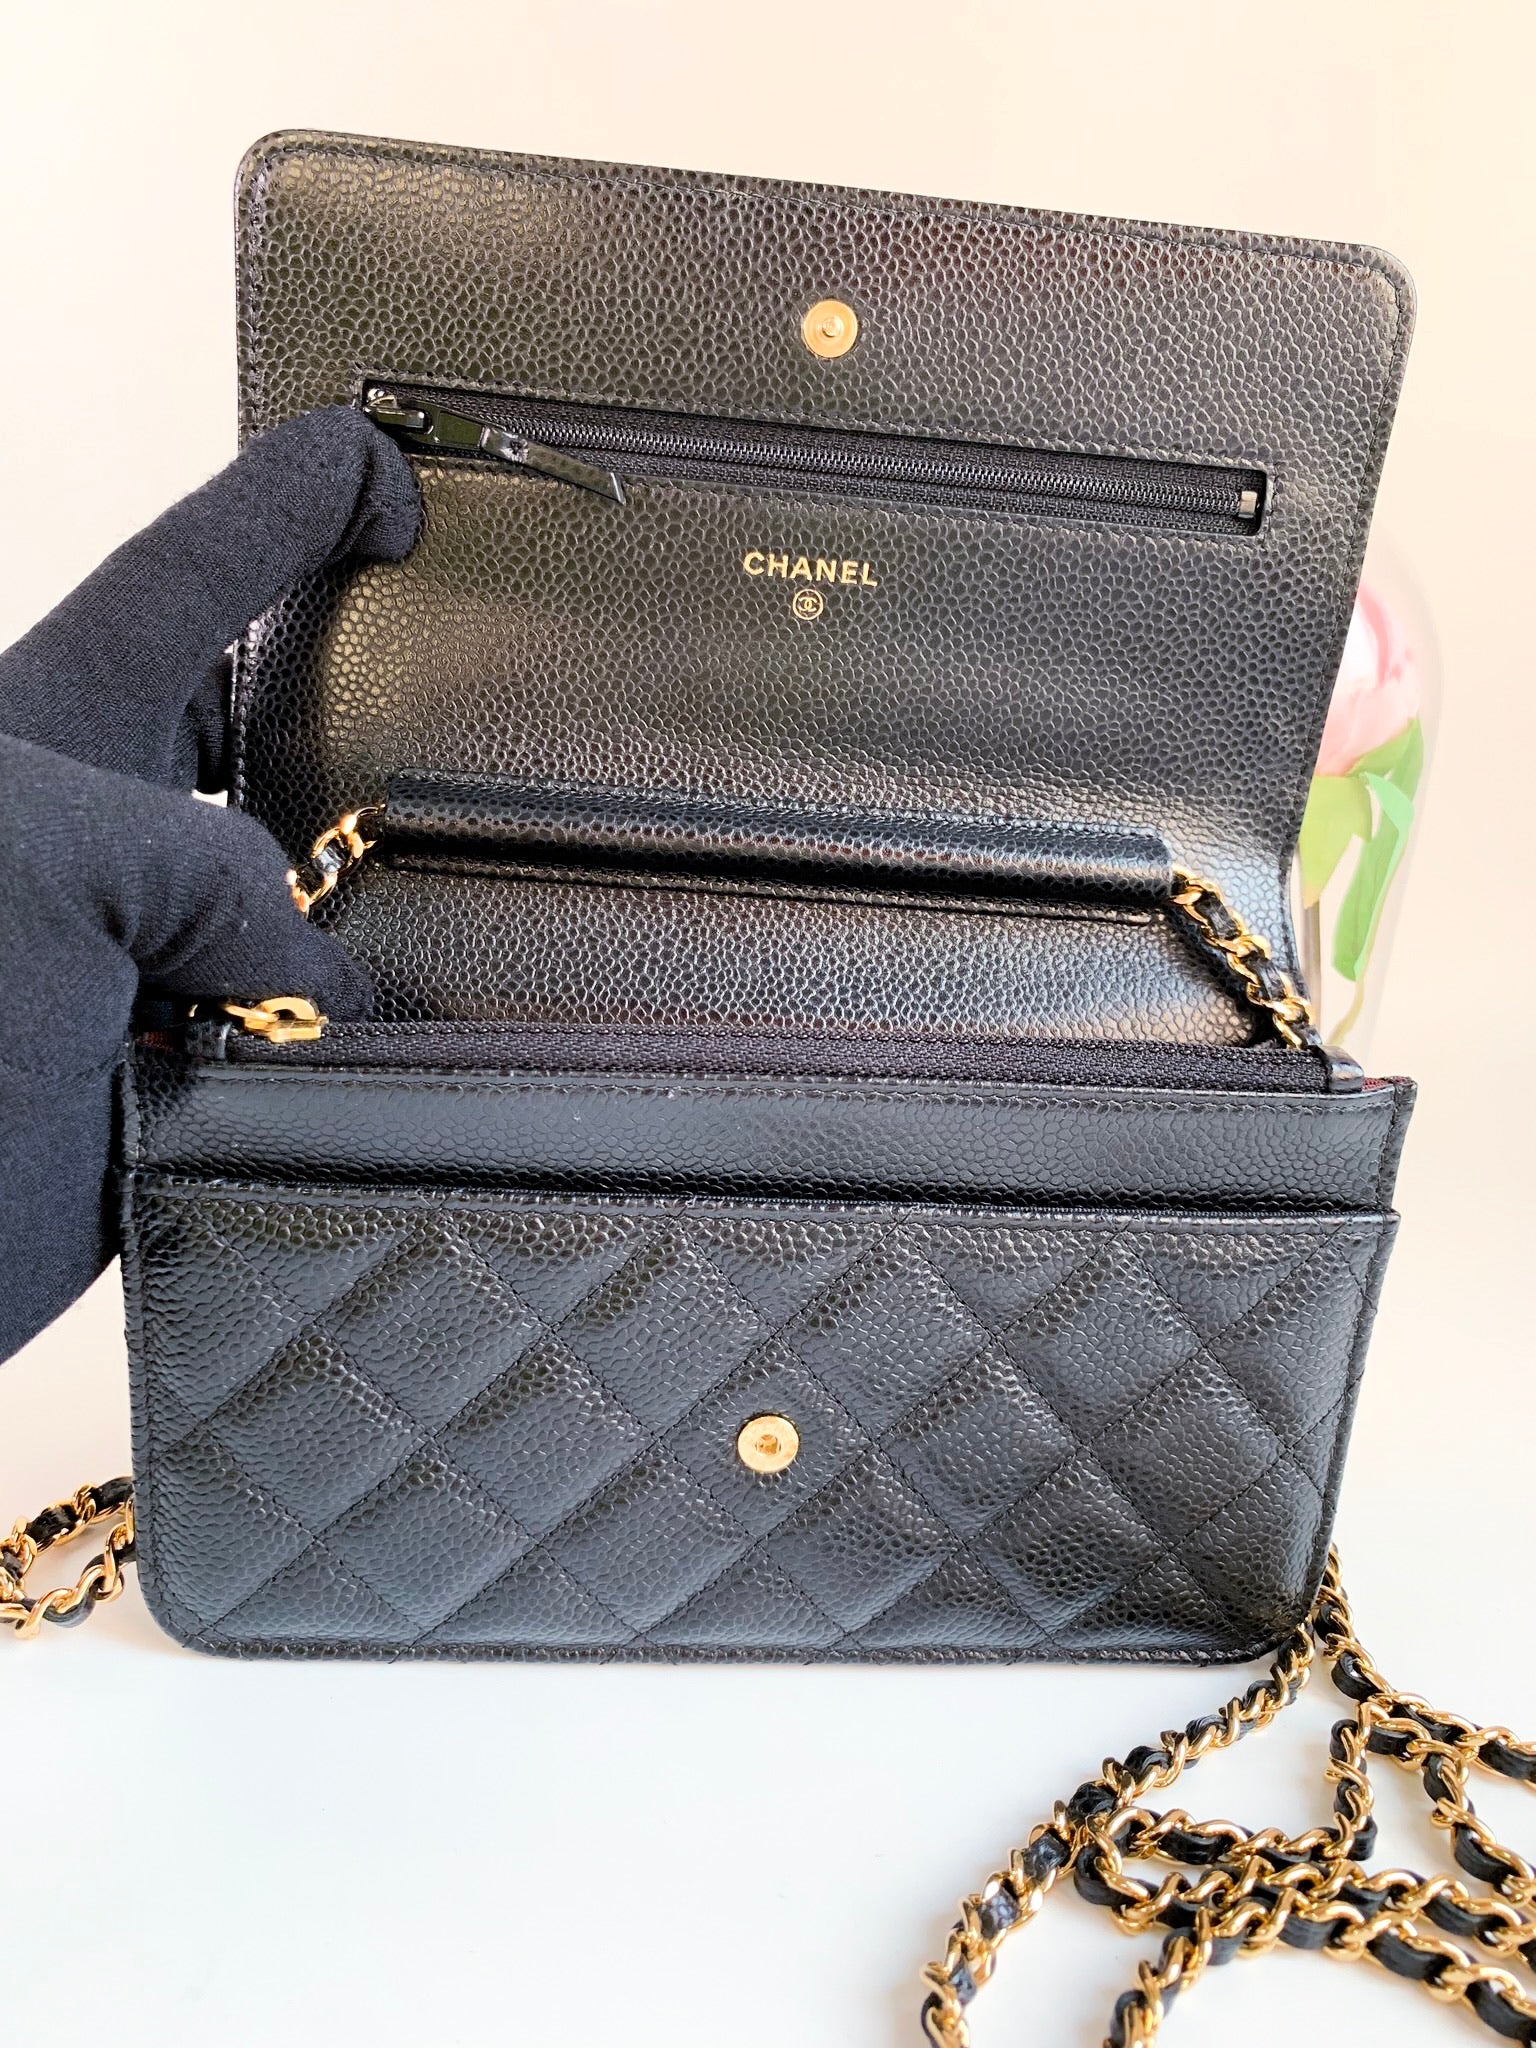 Chanel Classic Wallet on Chain WOC Black Caviar Gold Hardware